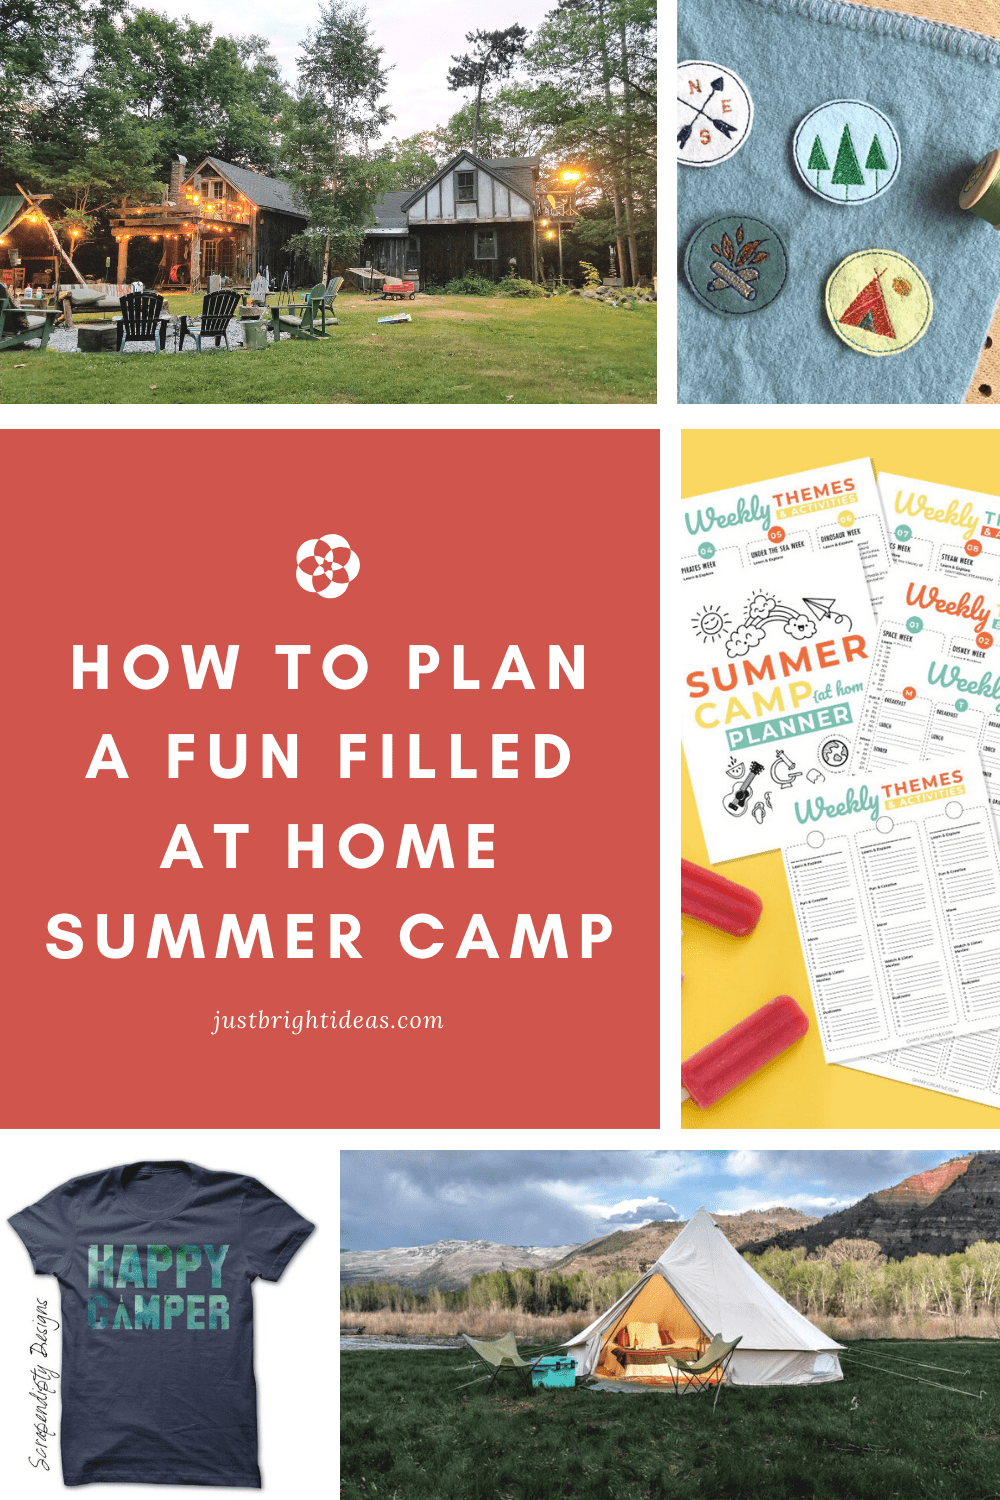 Are you thinking about planning an at home summer camp this year? Check out these fun activities for kids of all ages